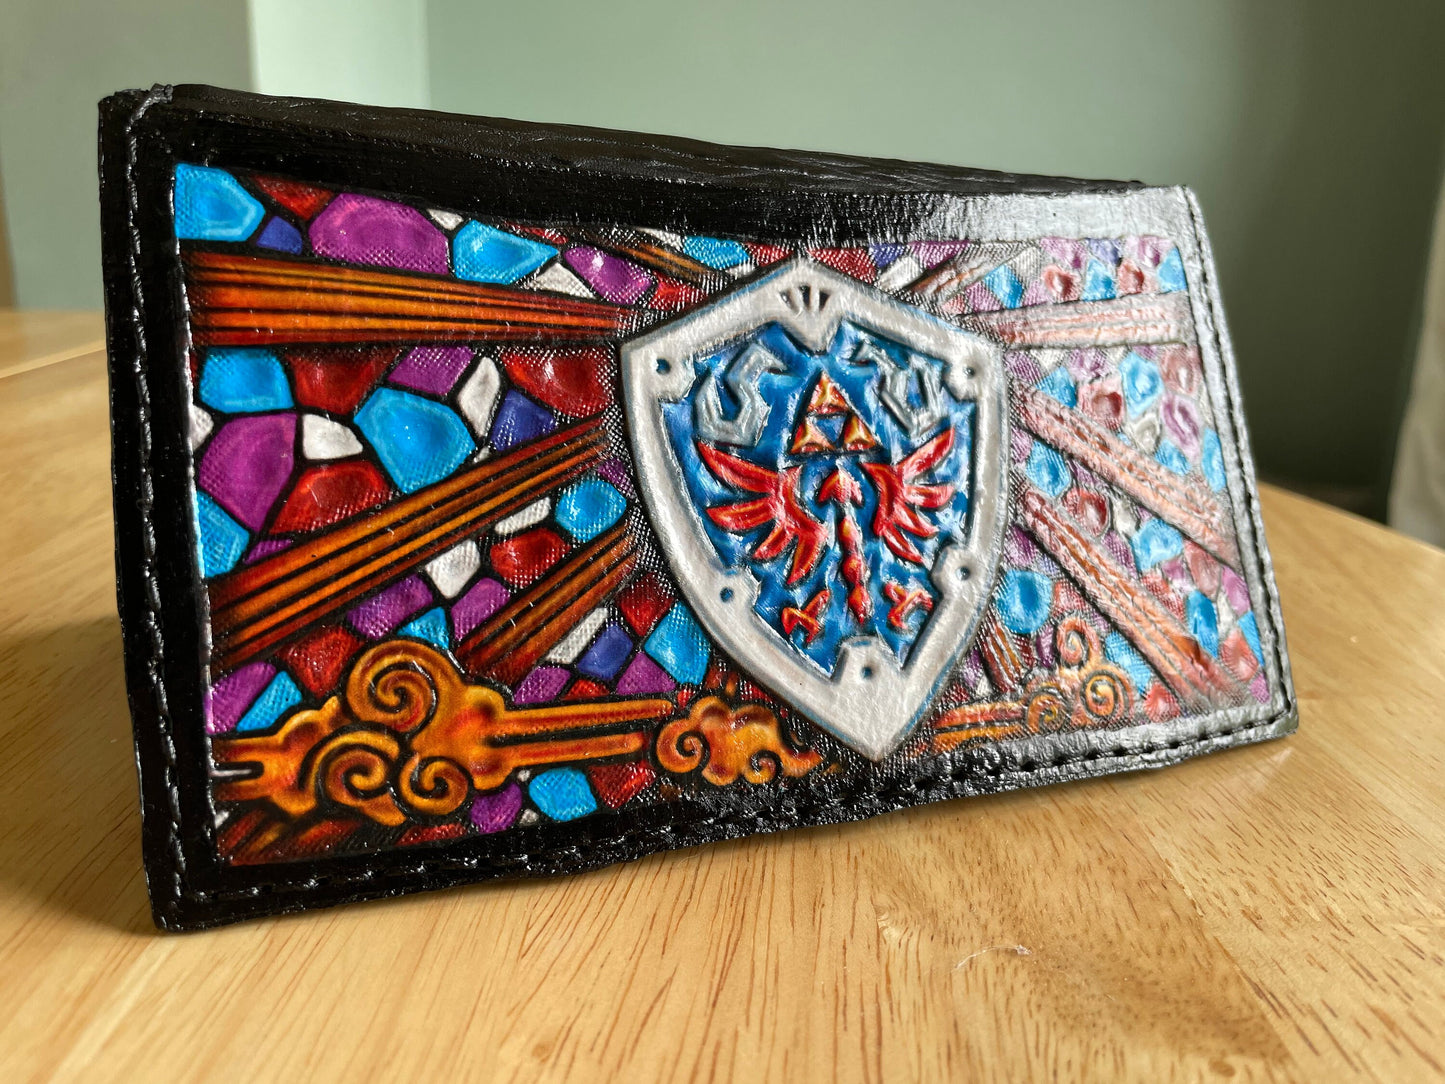 Windwaker - Long Purse/wallet 18 card holders + more - Hyrule Shield stained glass- Leather - Handcrafted Zelda inspired Long Wallet -